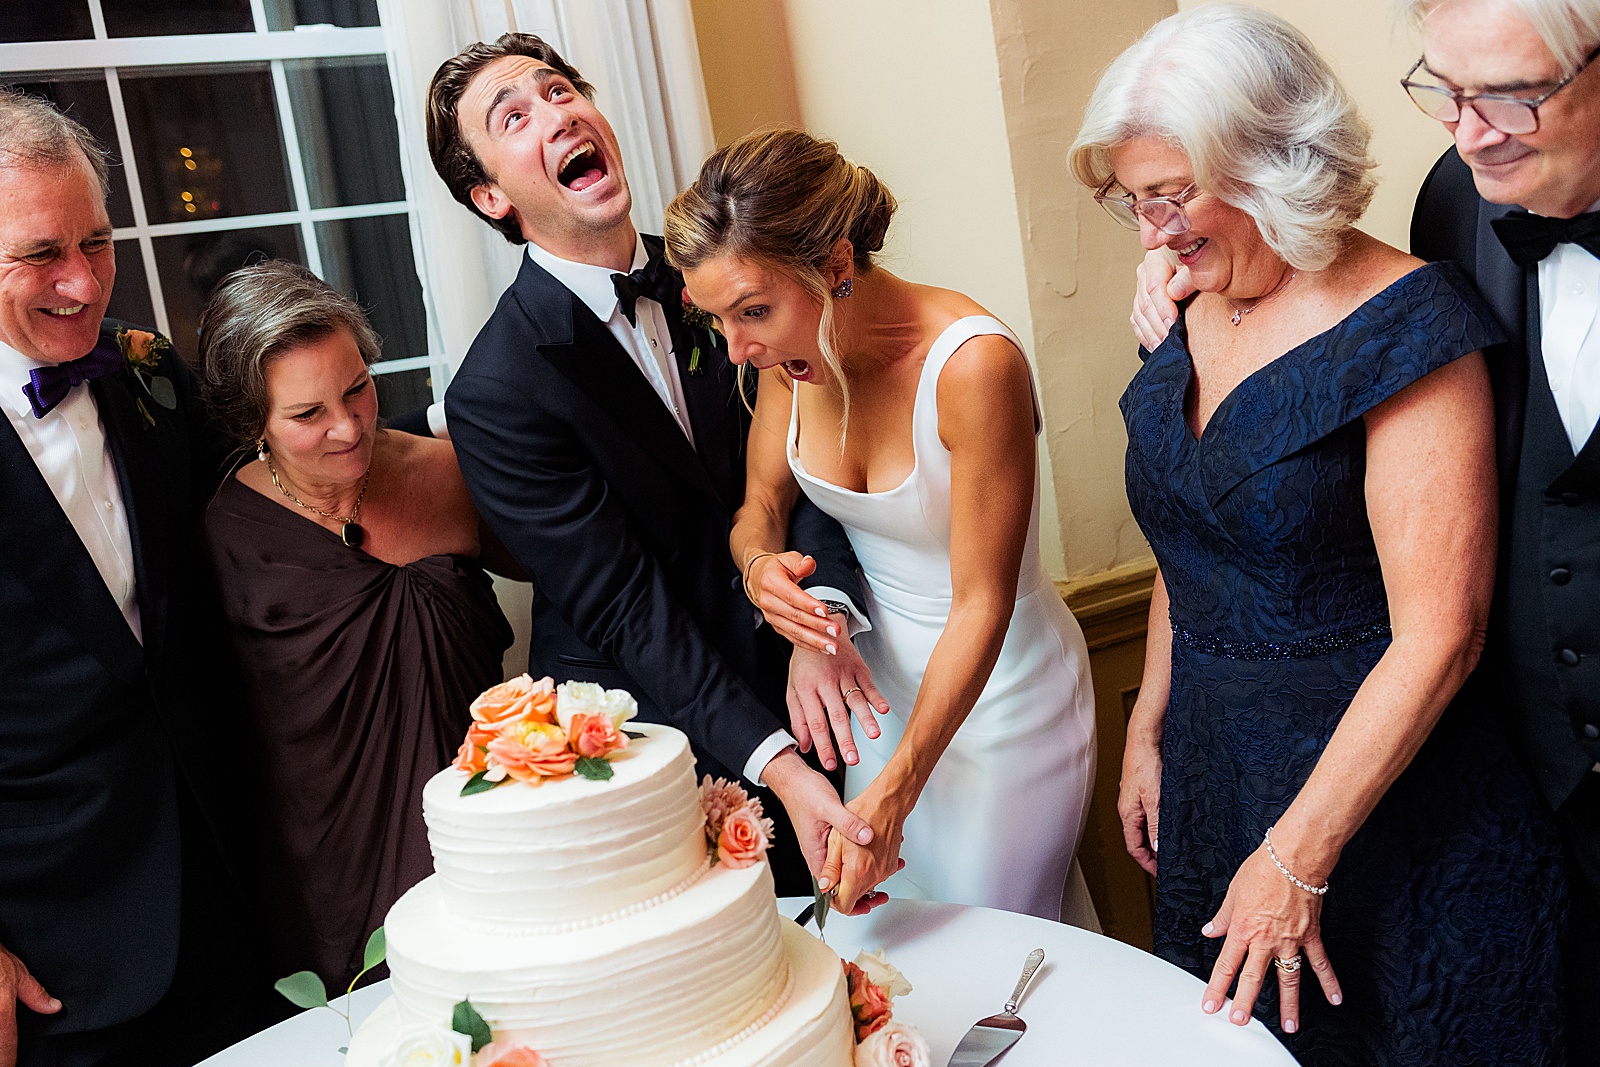 Bride and groom cut their wedding cake with silly expressions